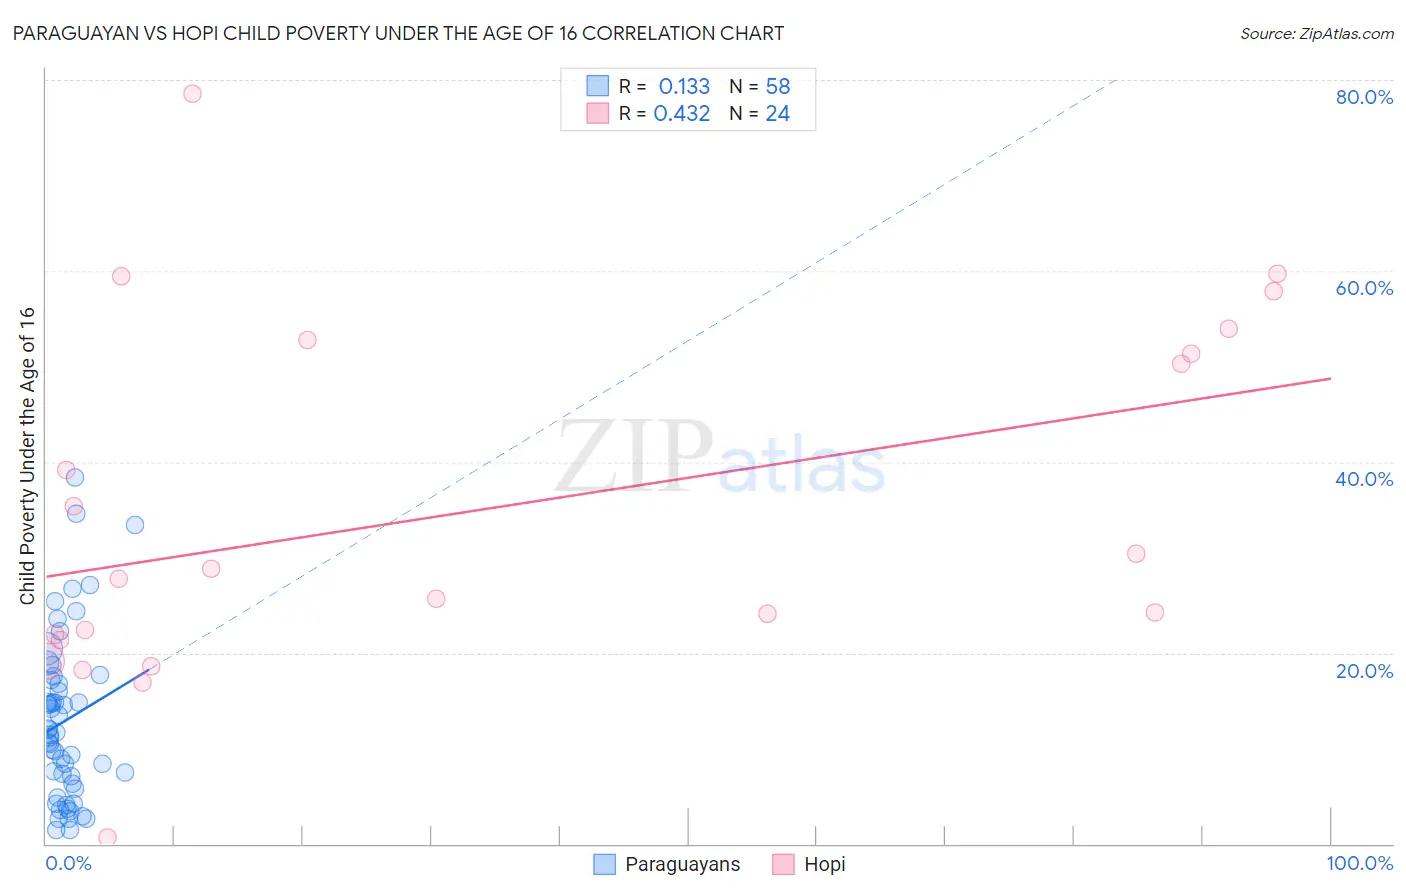 Paraguayan vs Hopi Child Poverty Under the Age of 16